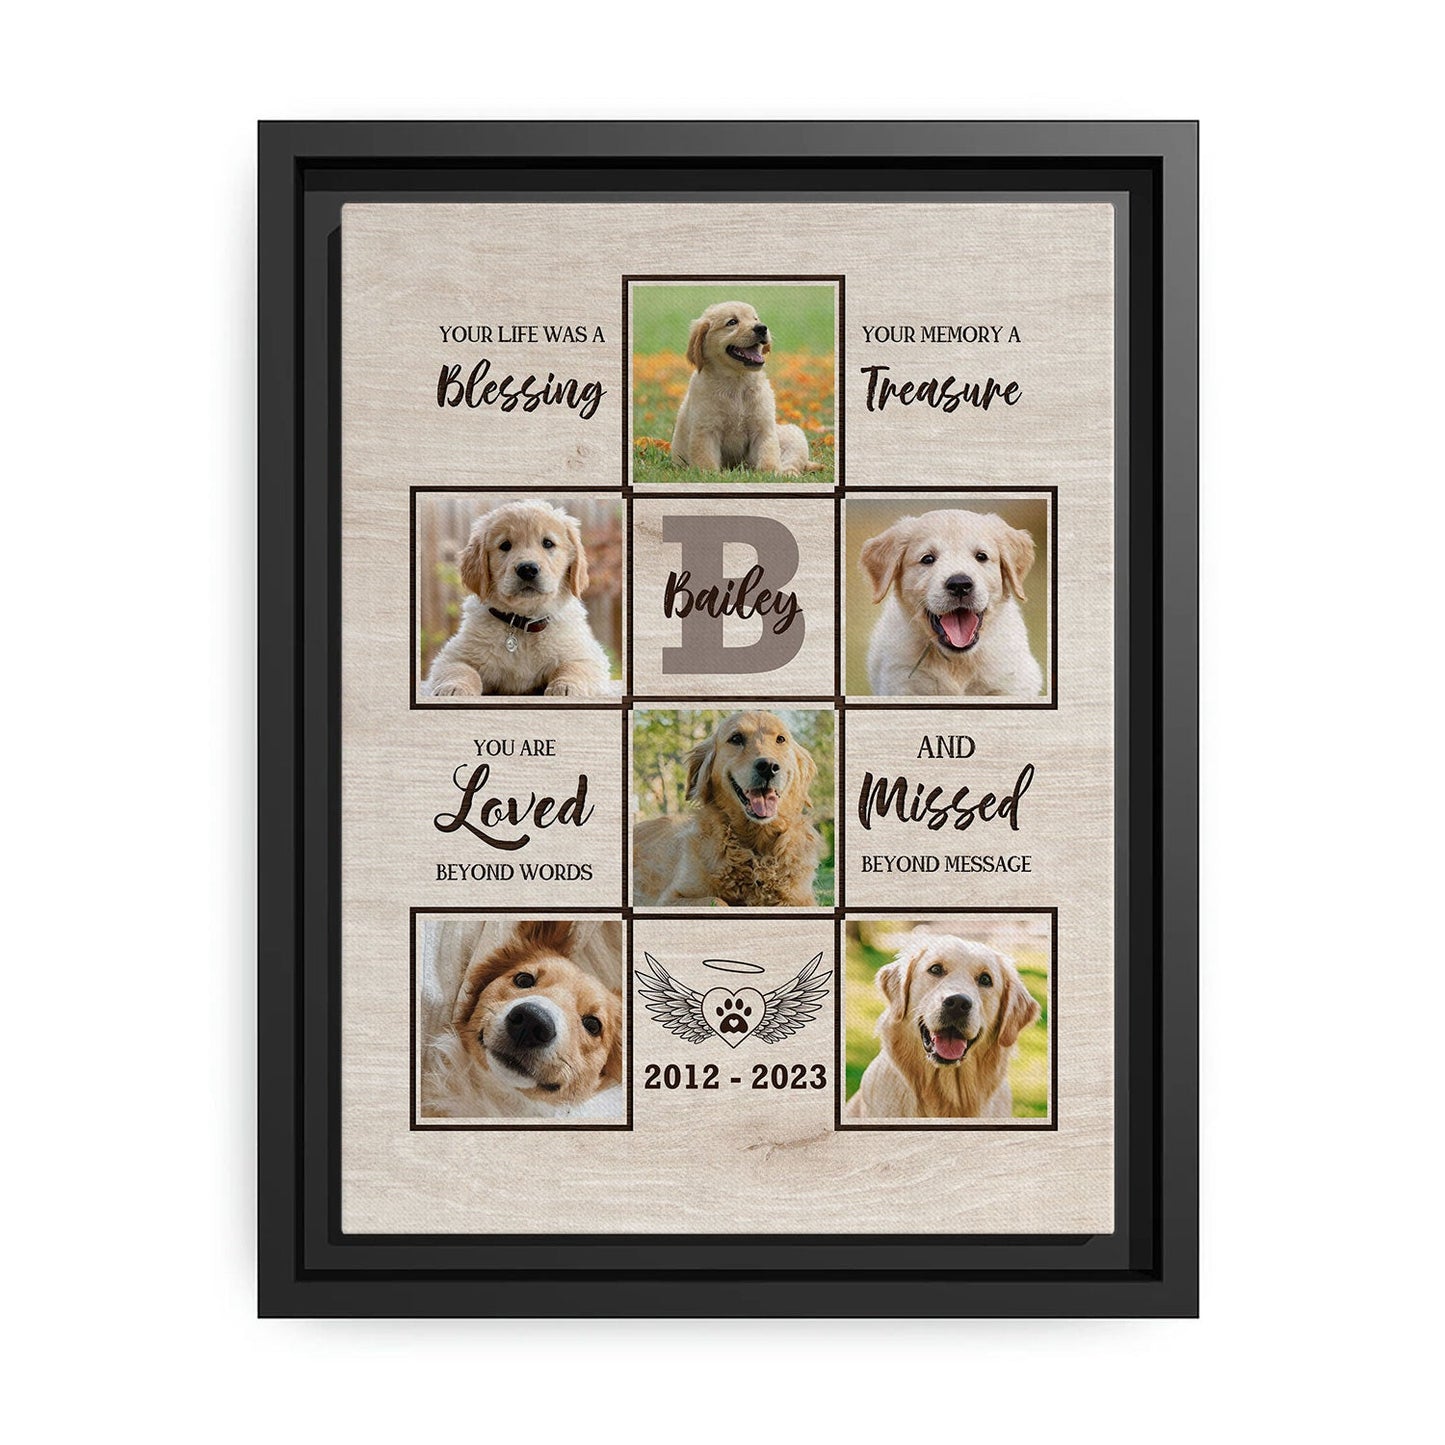 Missed Beyond Measure - Personalized Christmas gift for Dog or Cat Lovers - Custom Canvas Print - MyMindfulGifts